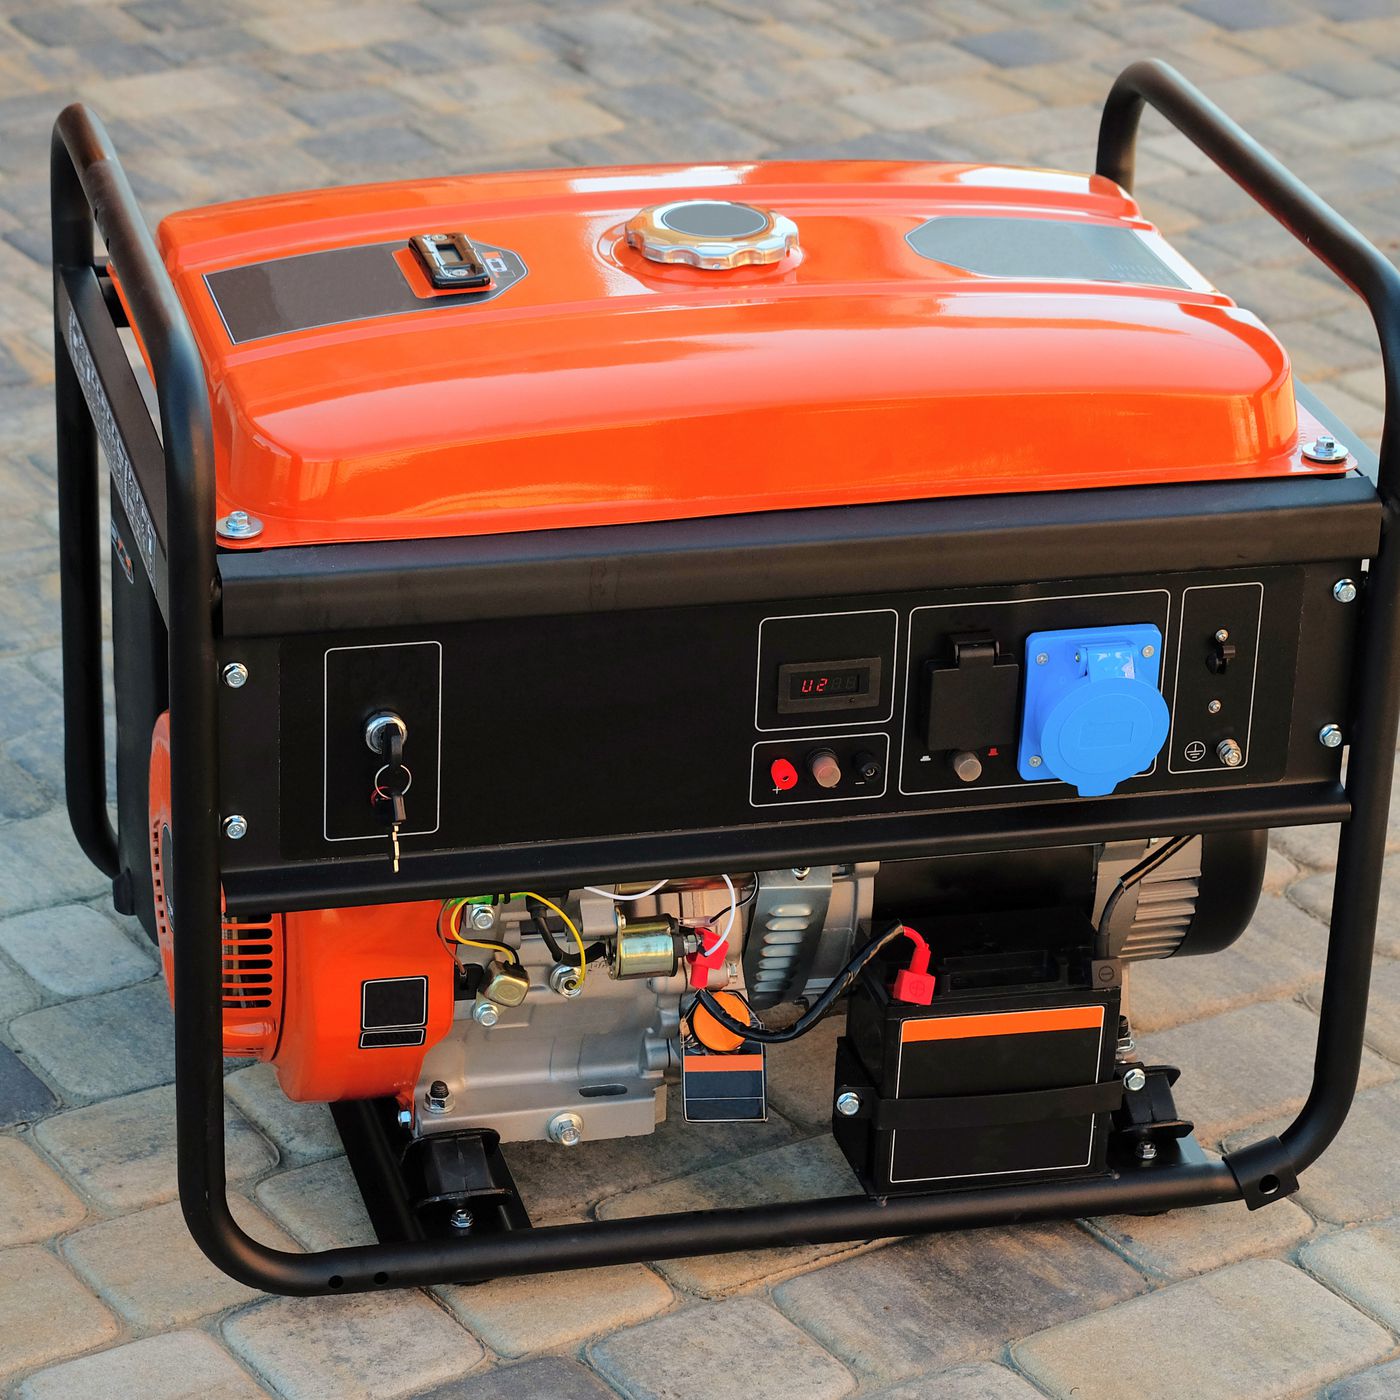 Advantages Of Buying A Used Inverter Generator